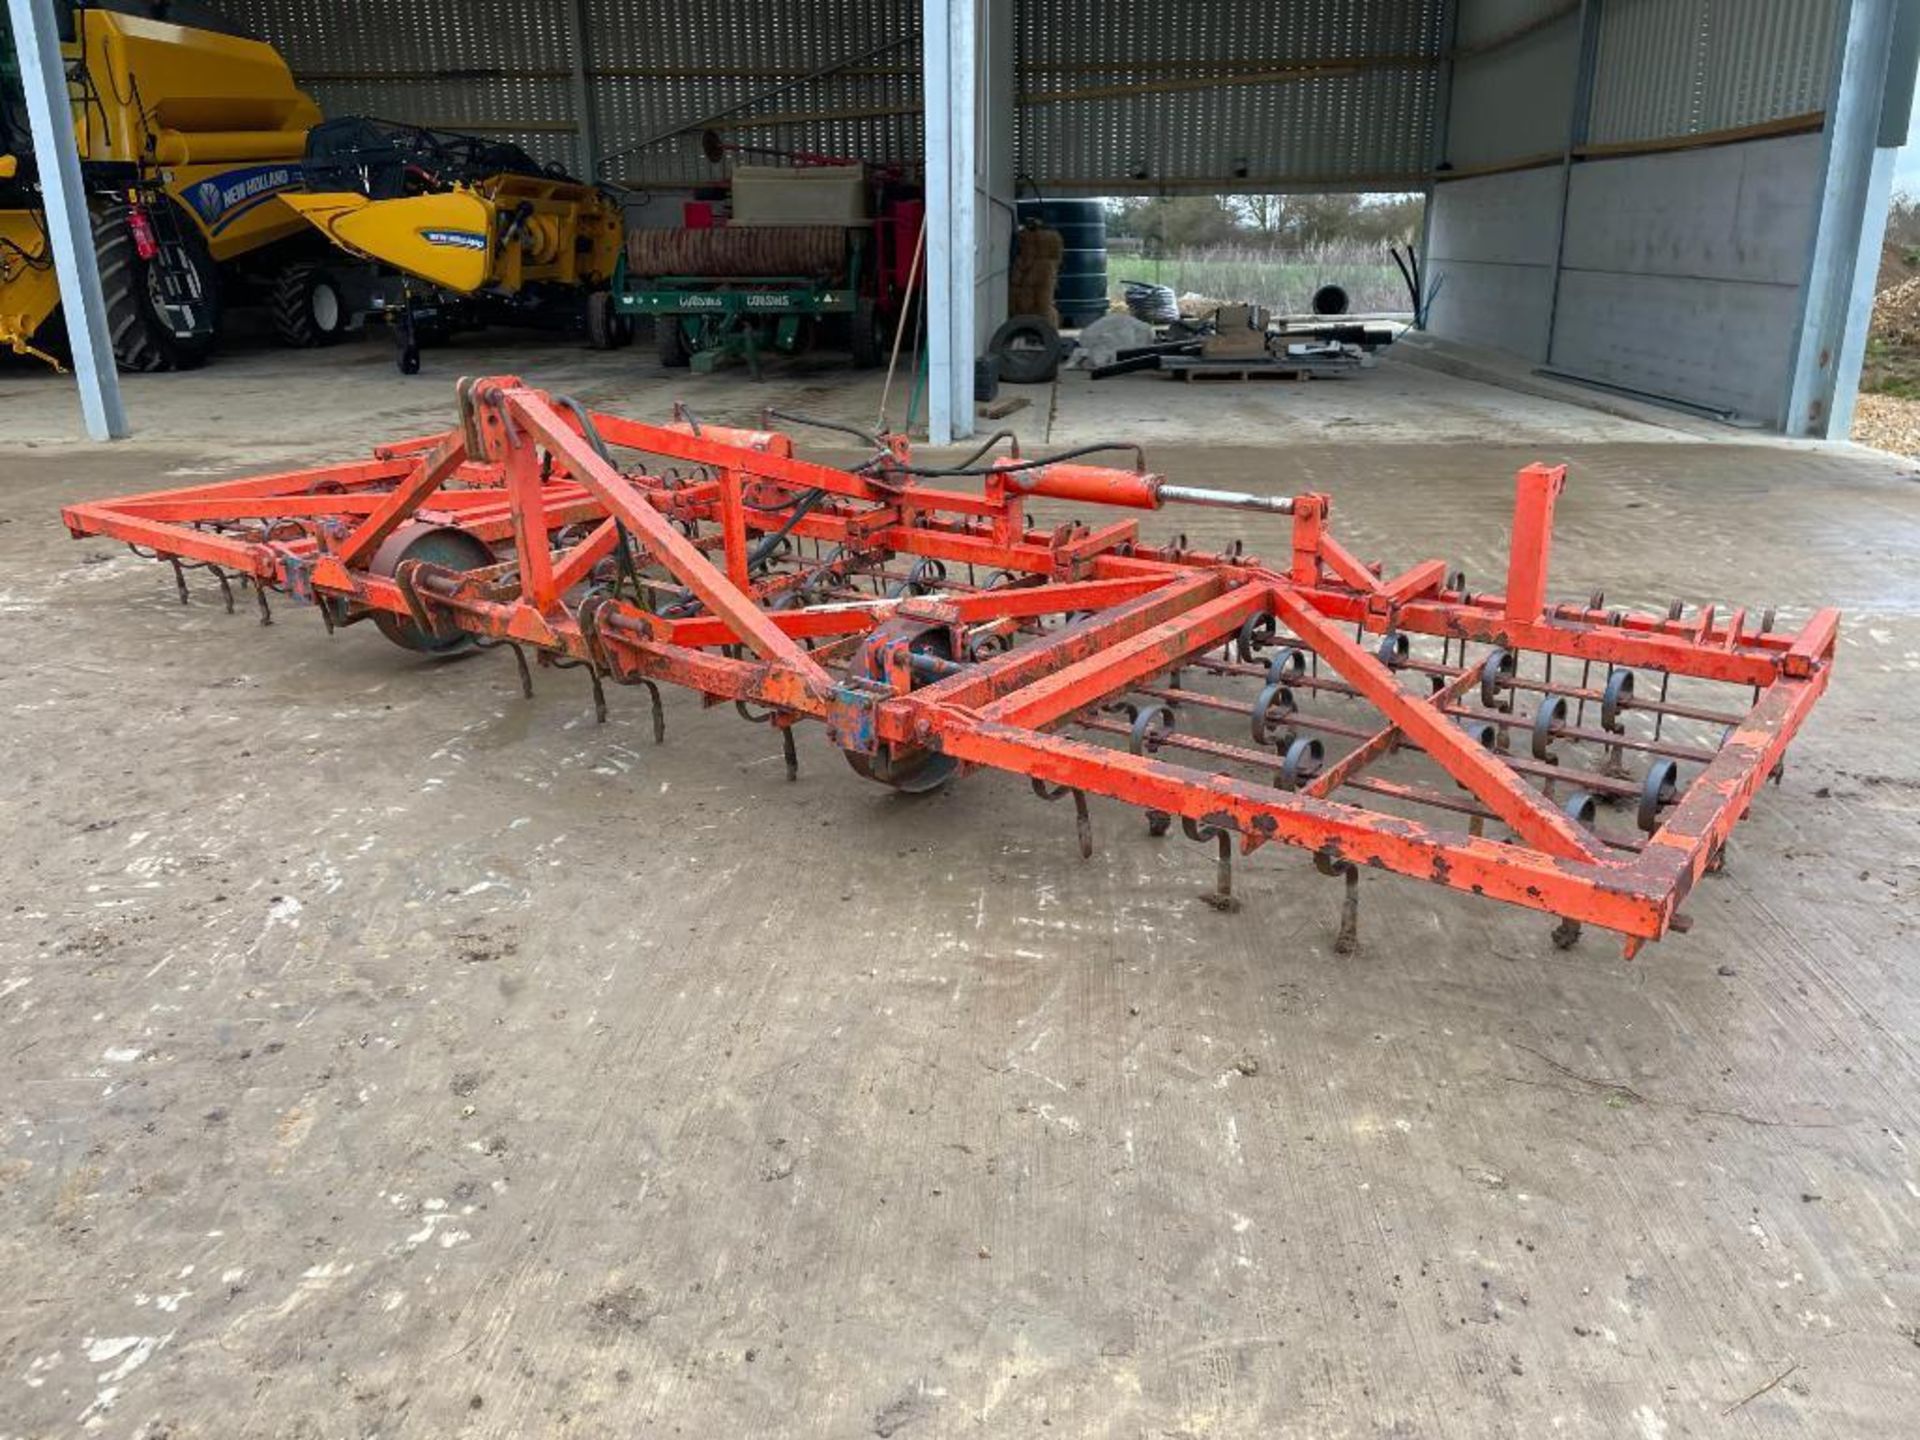 Springtine cultivator 6m hydraulic folding with following tines - Image 4 of 10